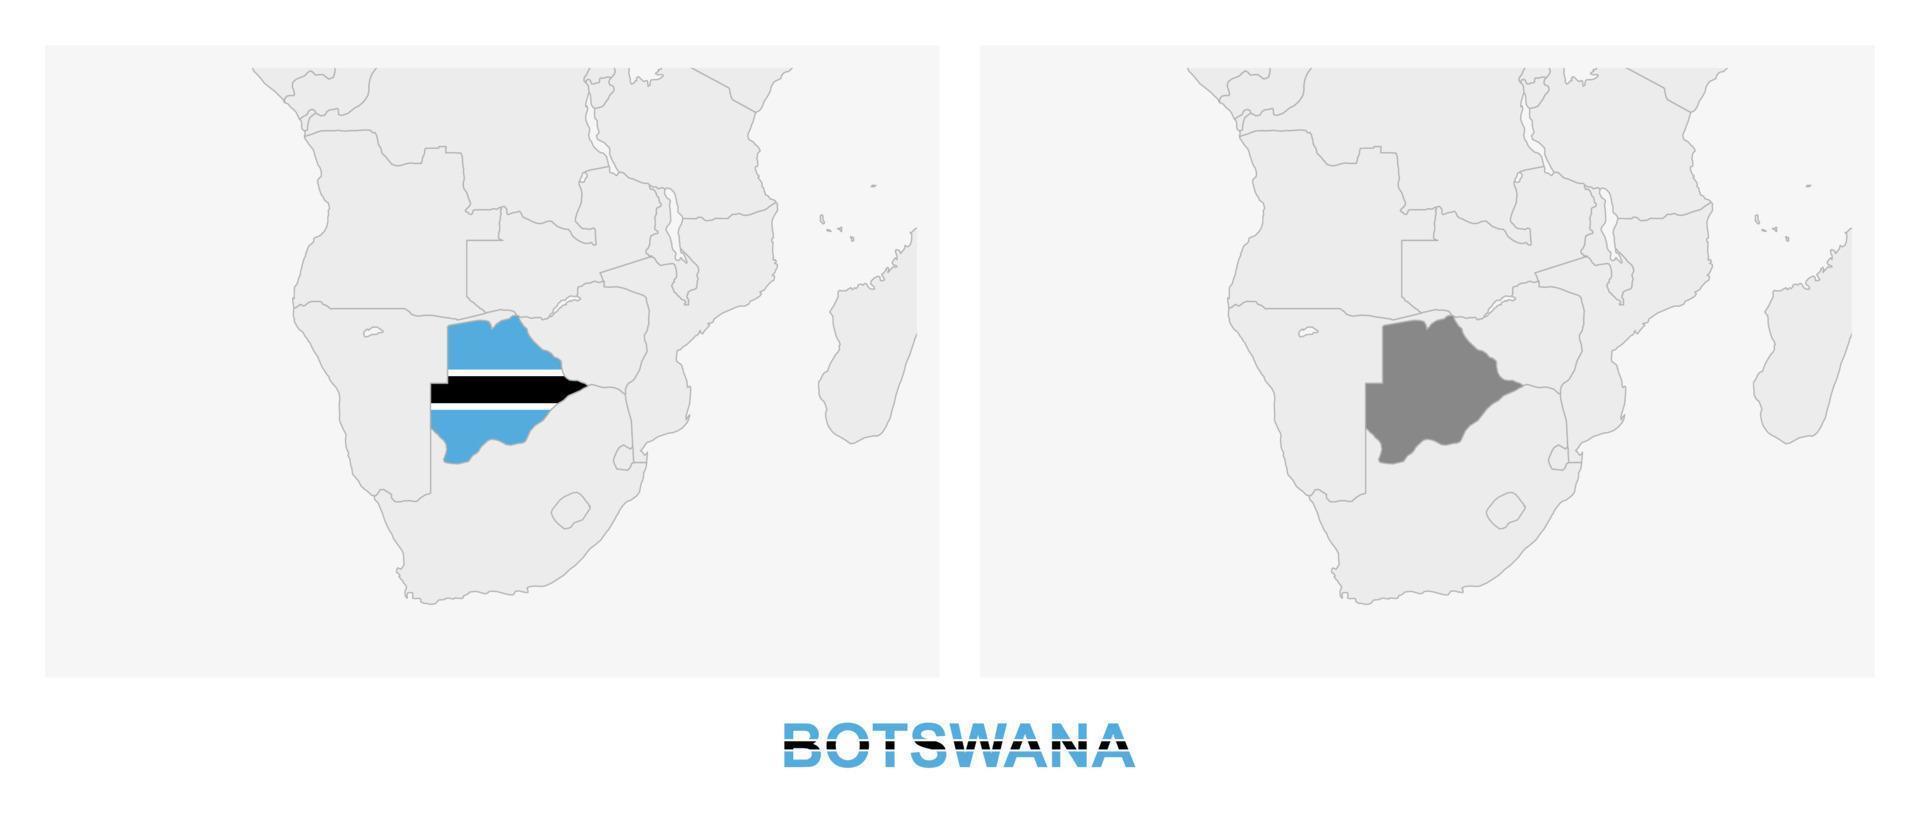 Two versions of the map of Botswana, with the flag of Botswana and highlighted in dark grey. vector